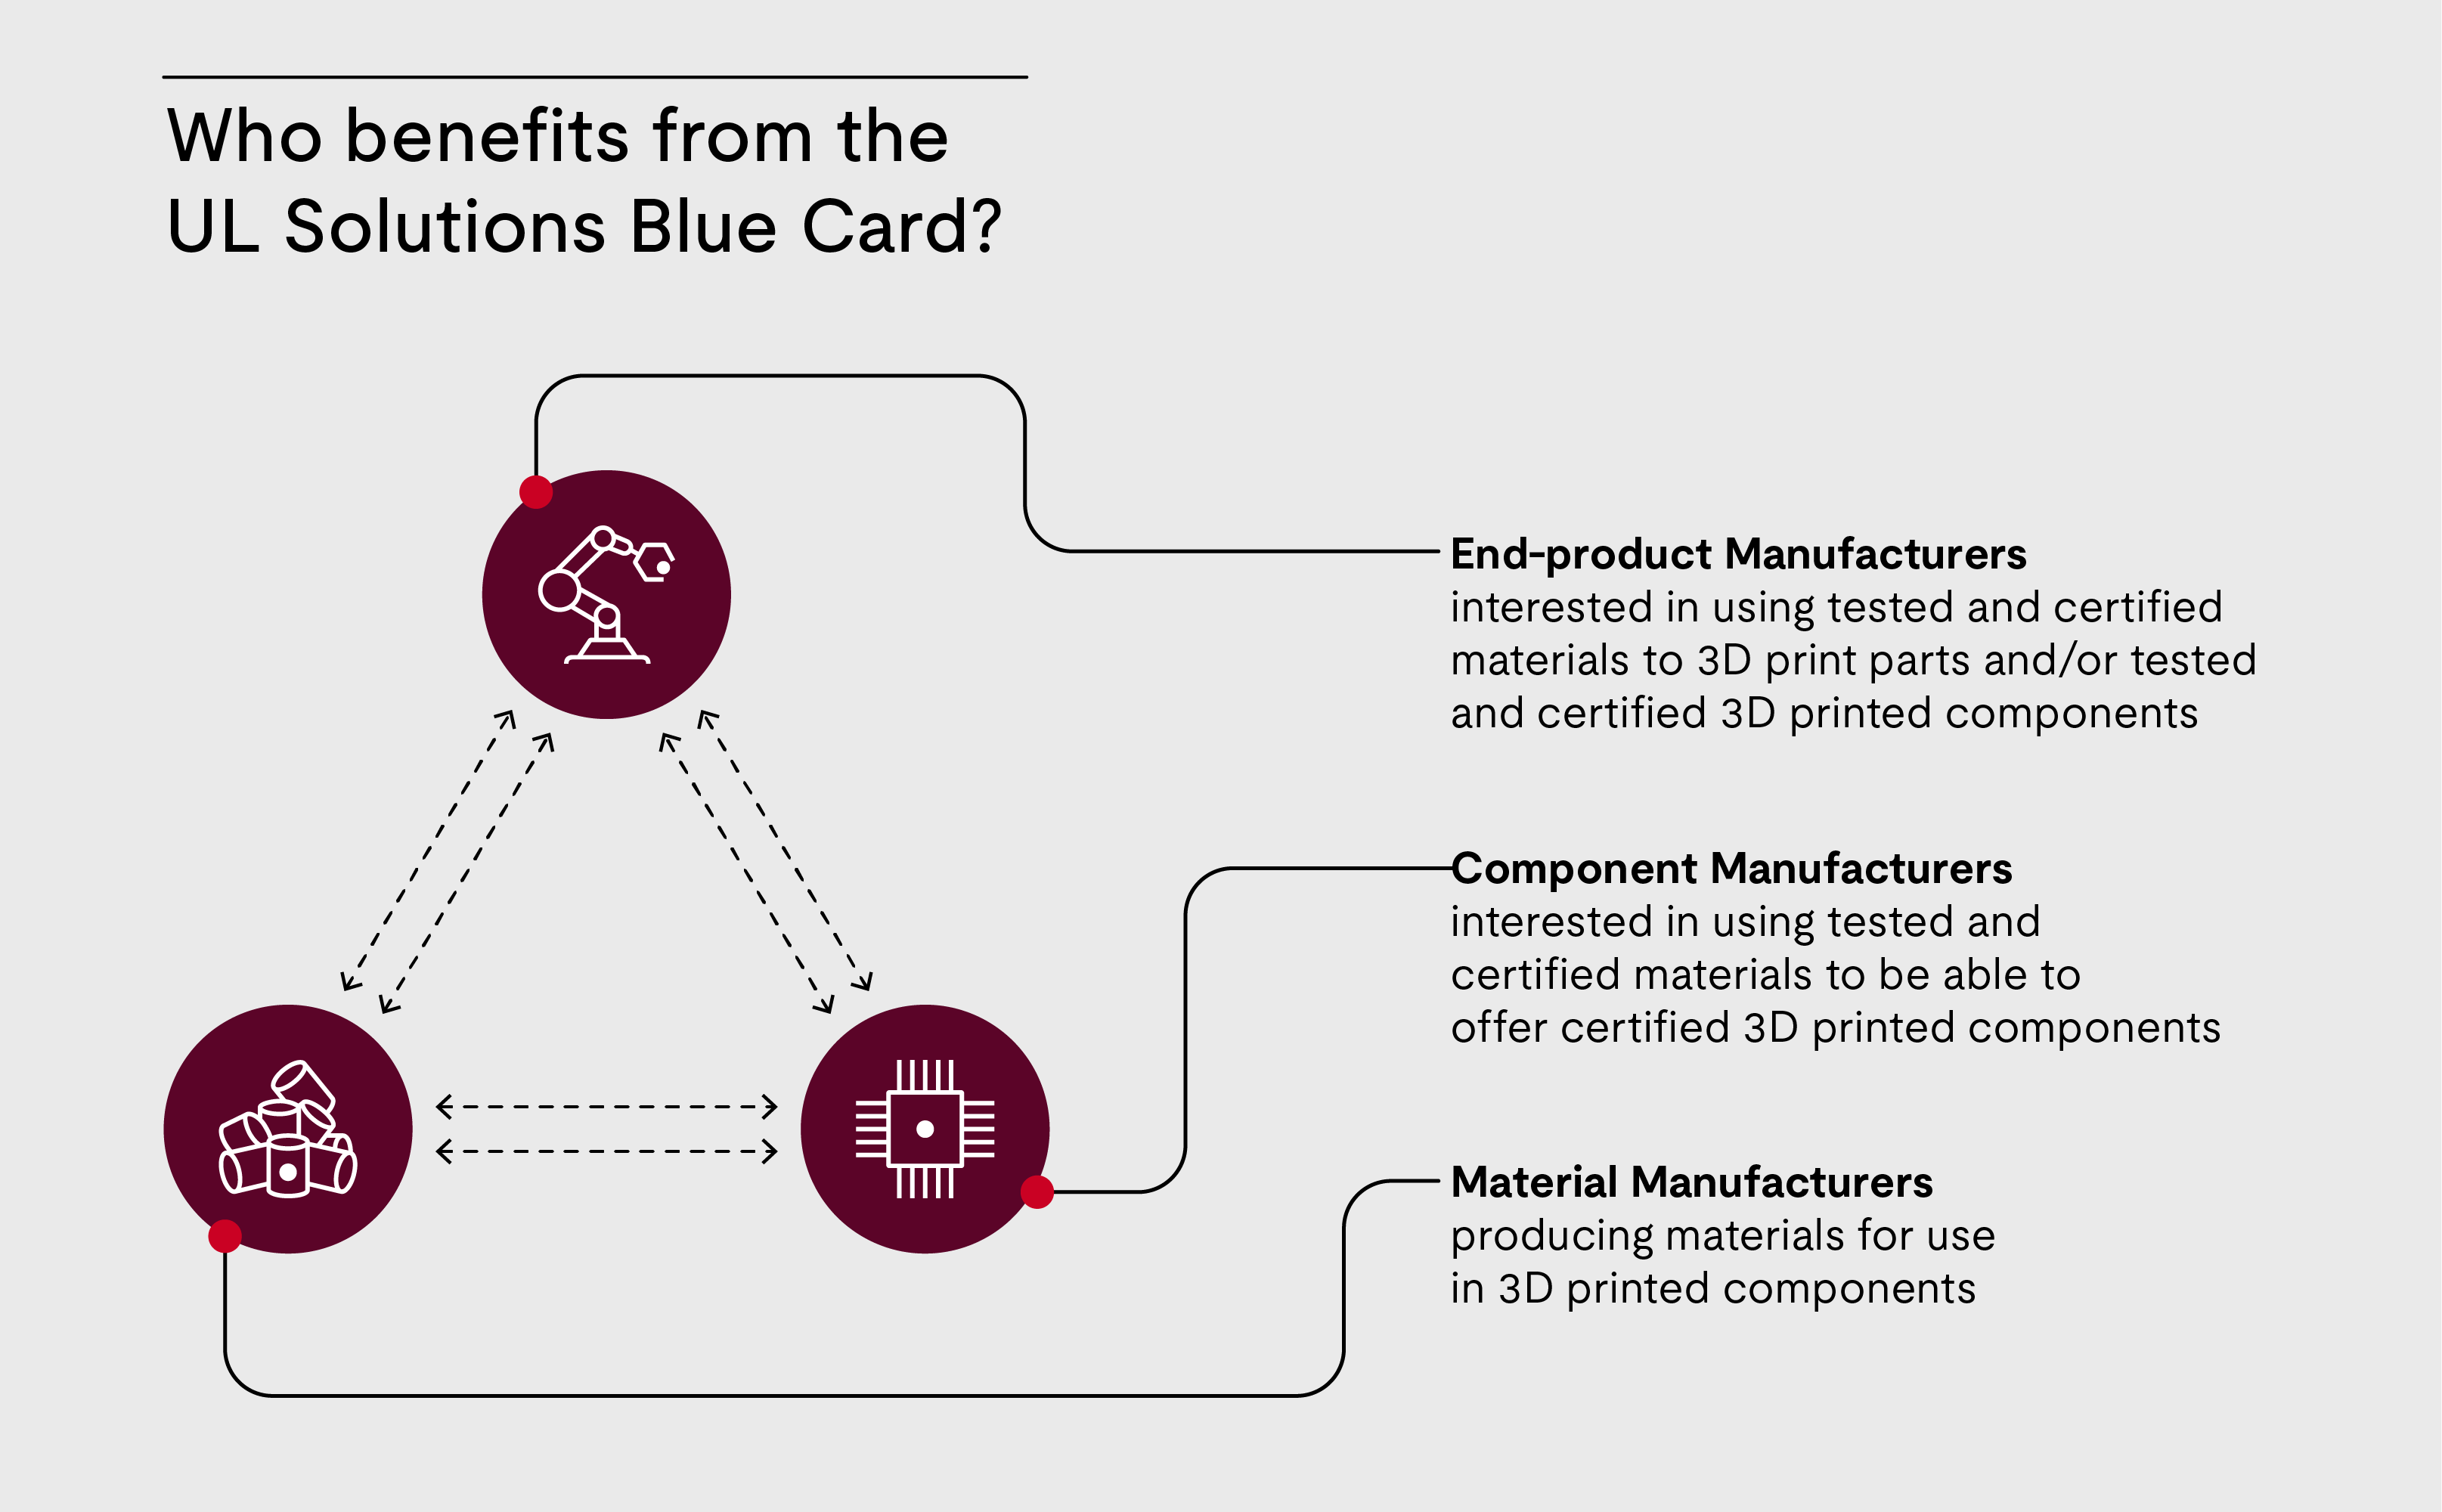 Who benefits from the UL Solutions Blue Card?